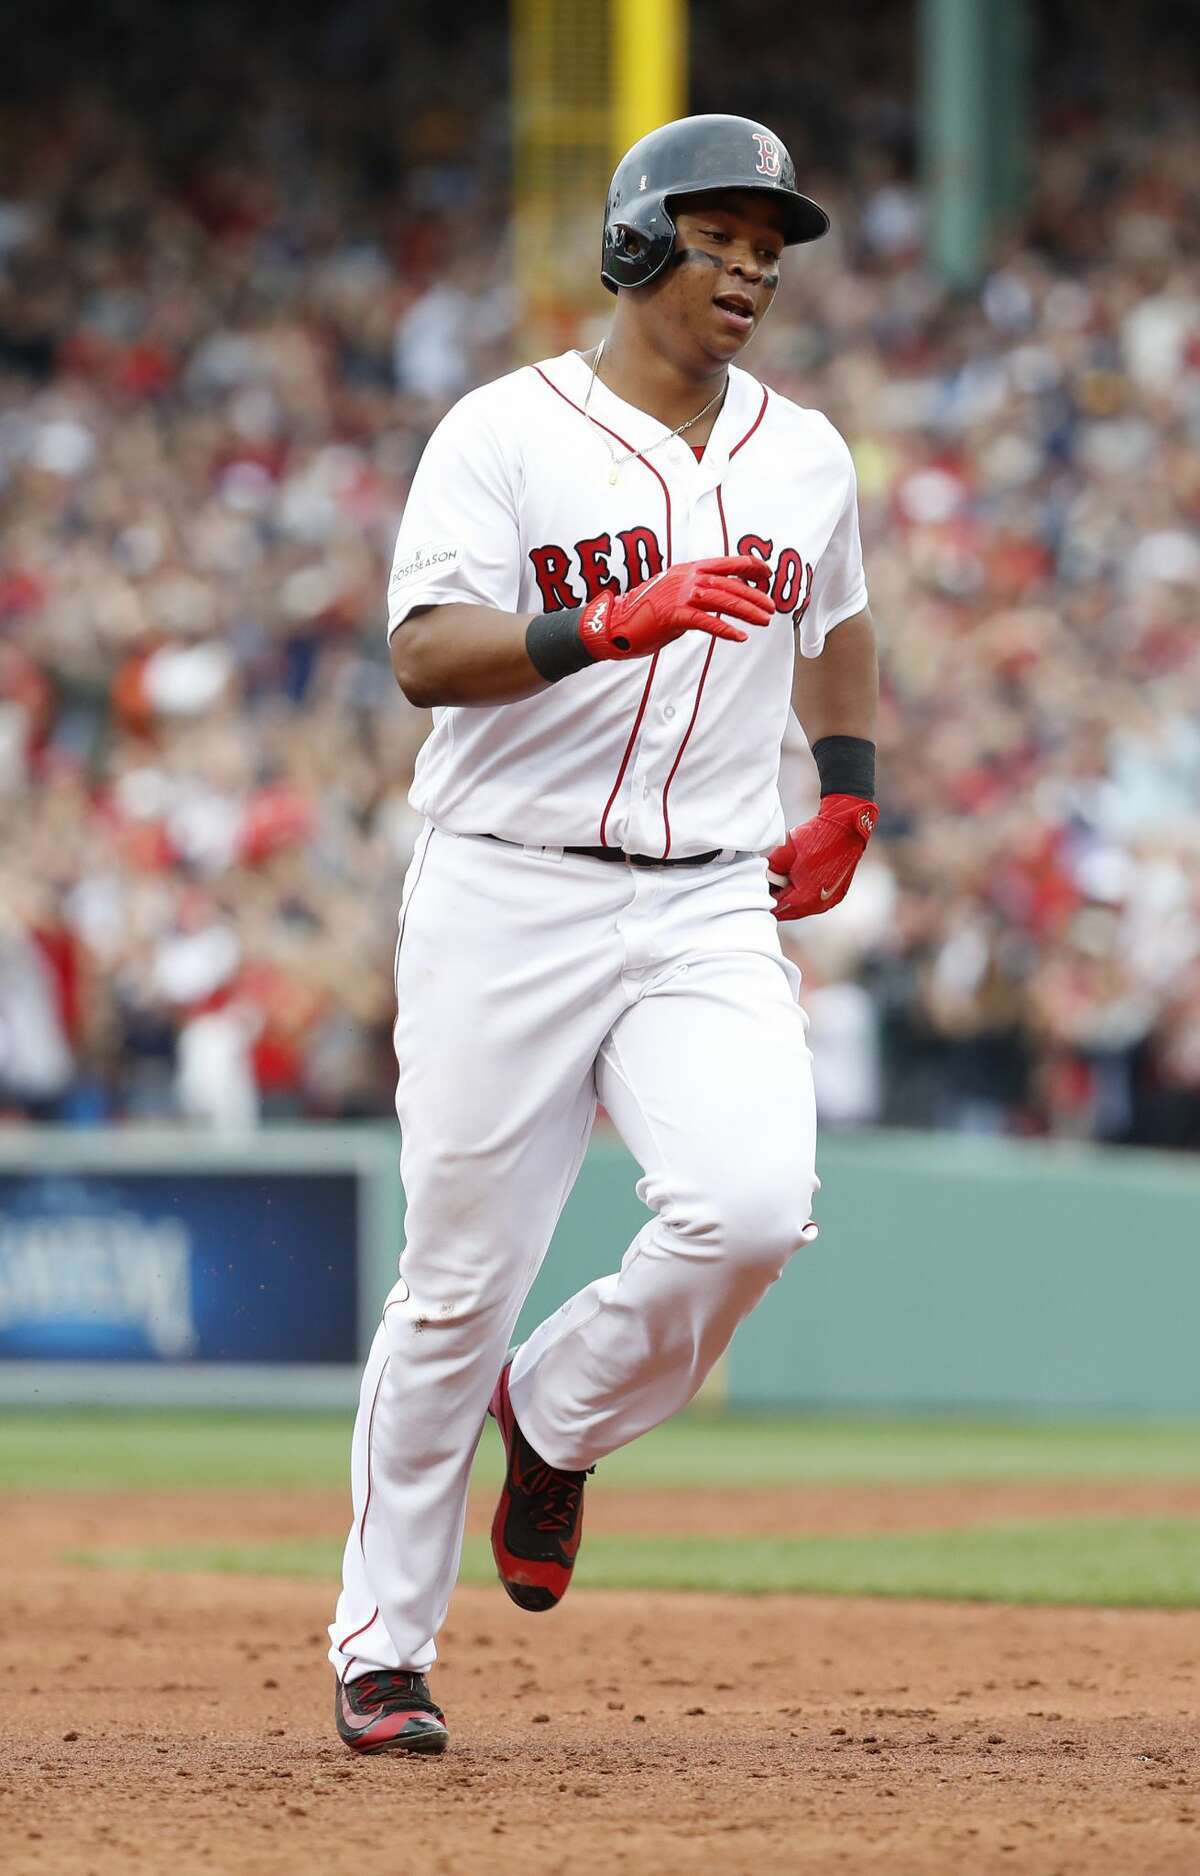 Boston Red Sox Rafael Devers runs the bases after his home run off of Astros relief pitcher Francisco Liriano during the third inning of the ALDS Game 3 at Fenway Park, Sunday, Oct. 8, 2017, in Boston . ( Karen Warren / Houston Chronicle )